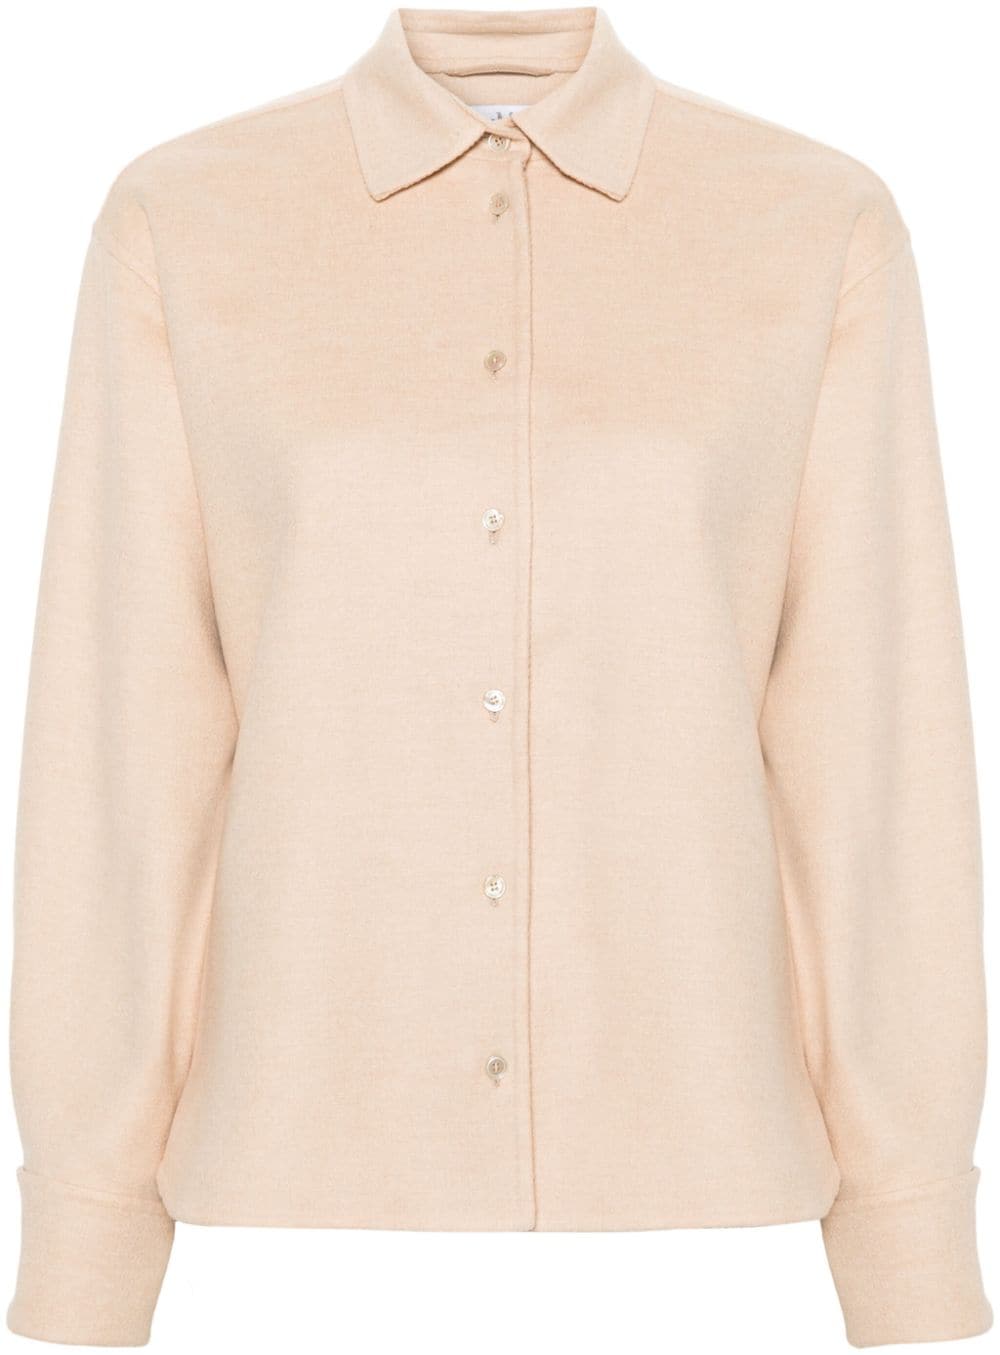 MAX MARA Cozy Camel Wool Blouse for Women - Perfect for Fall and Winter